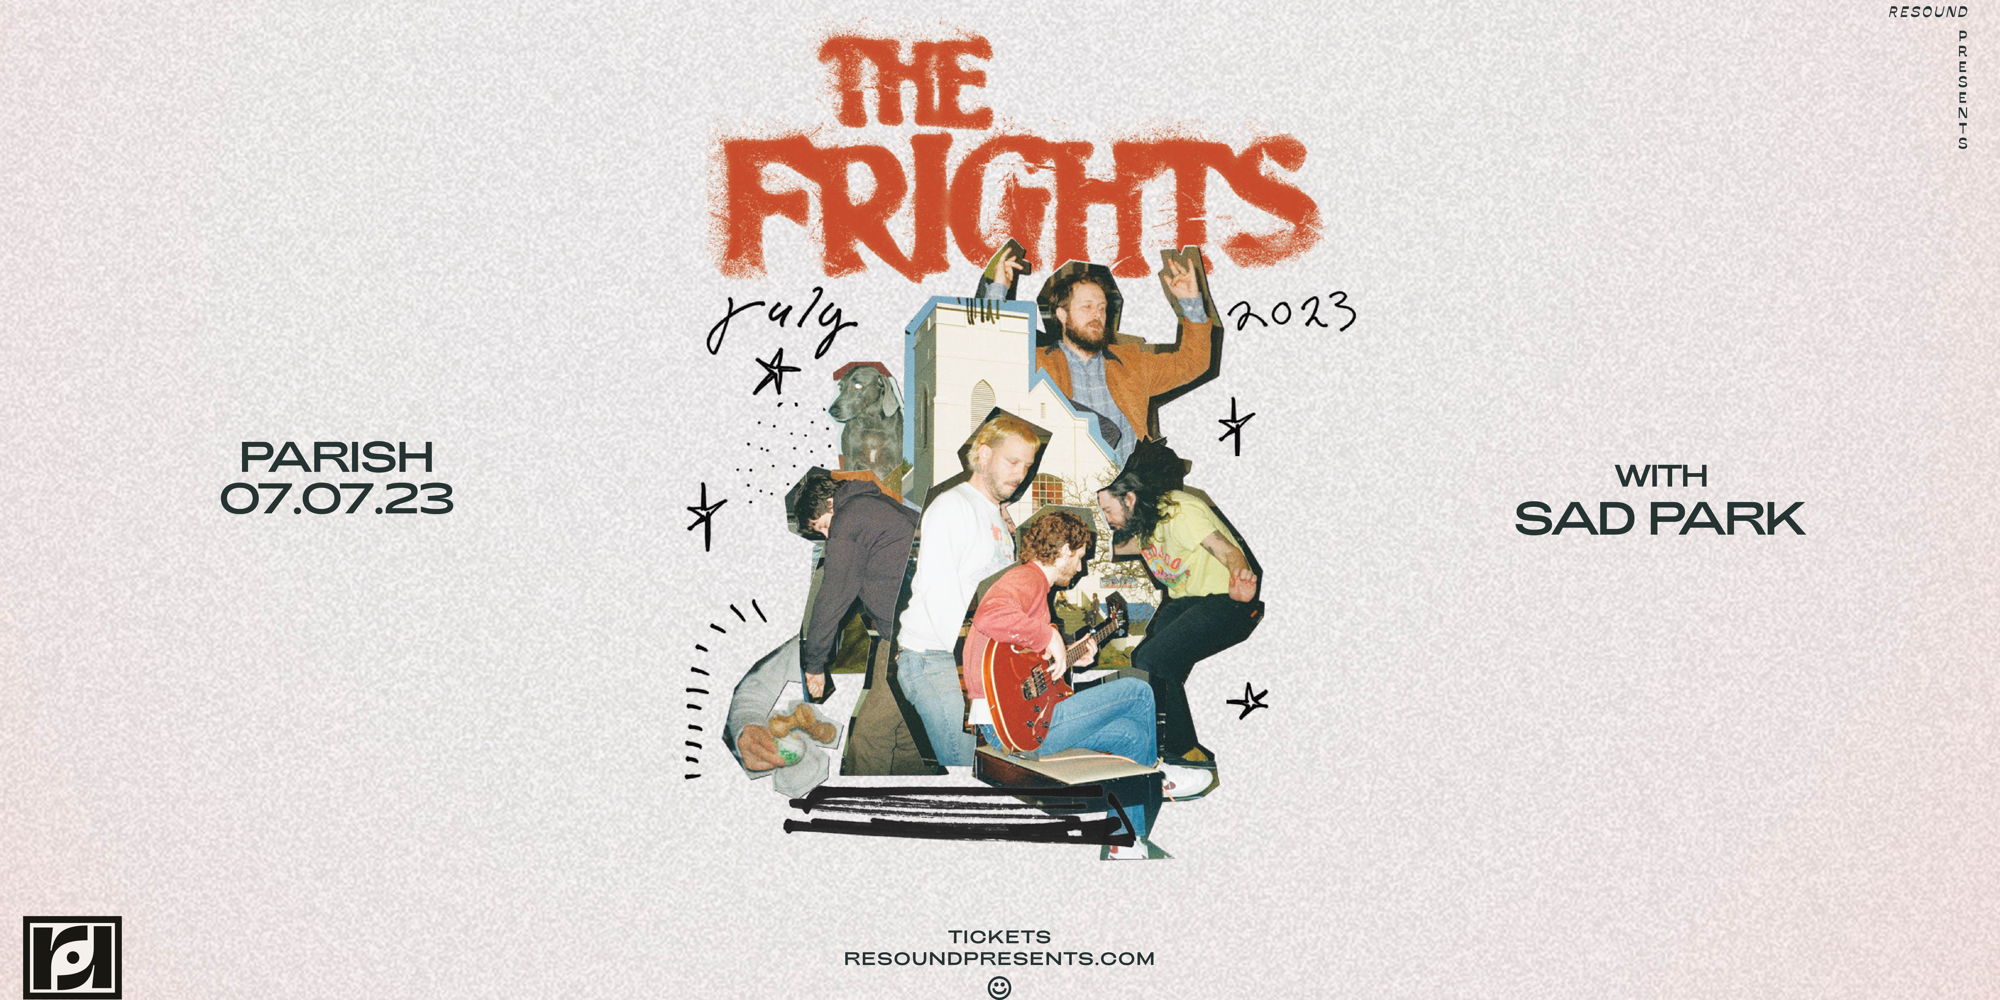 Resound Presents: The Frights w/ Sad Park promotional image